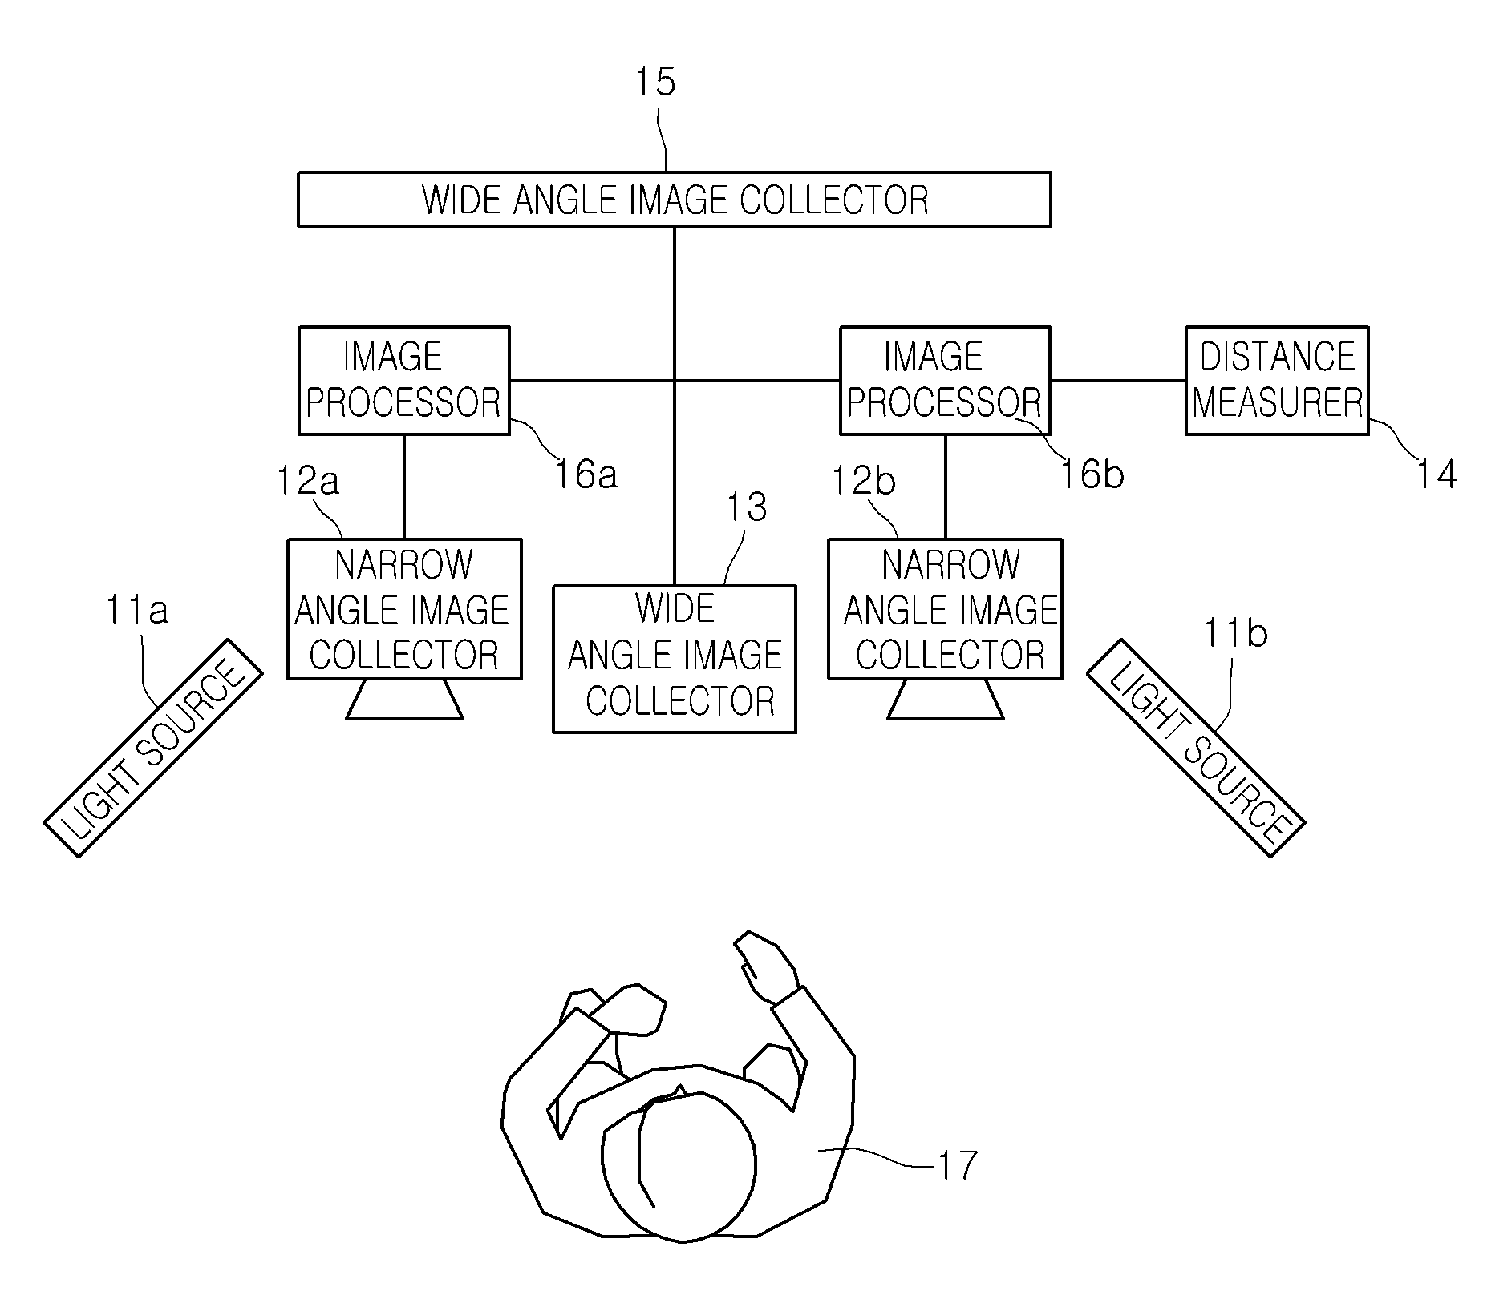 Iris scanning apparatus employing wide-angle camera, for identifying subject, and method thereof